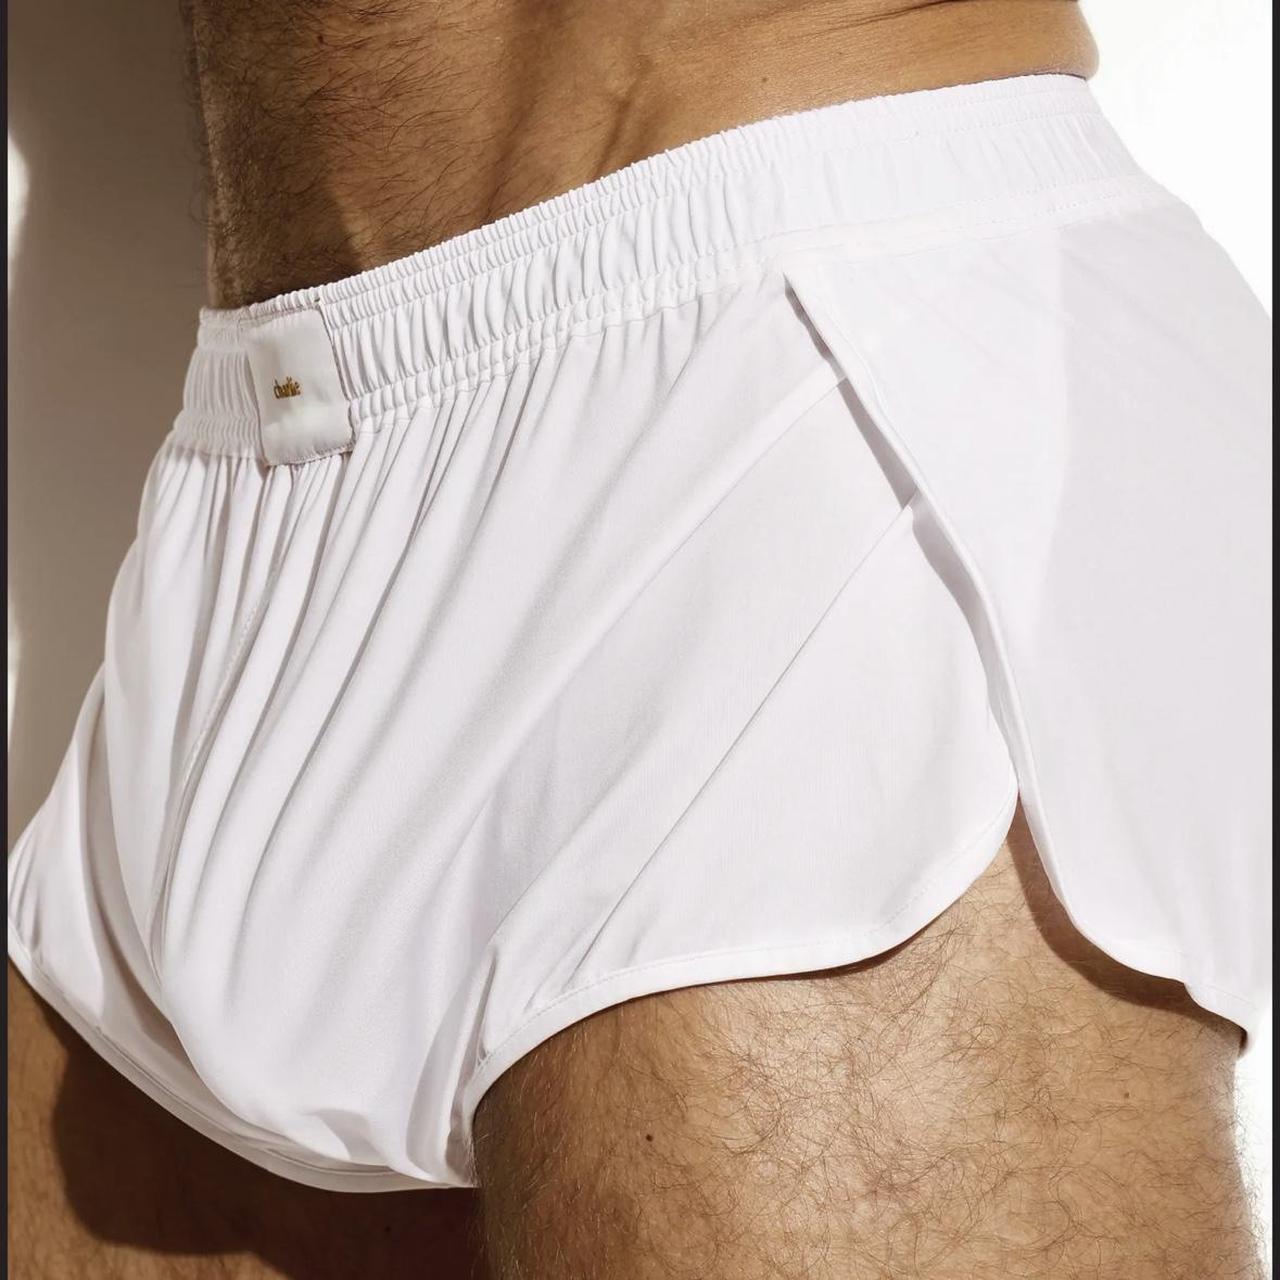 Men's White Boxers-and-briefs